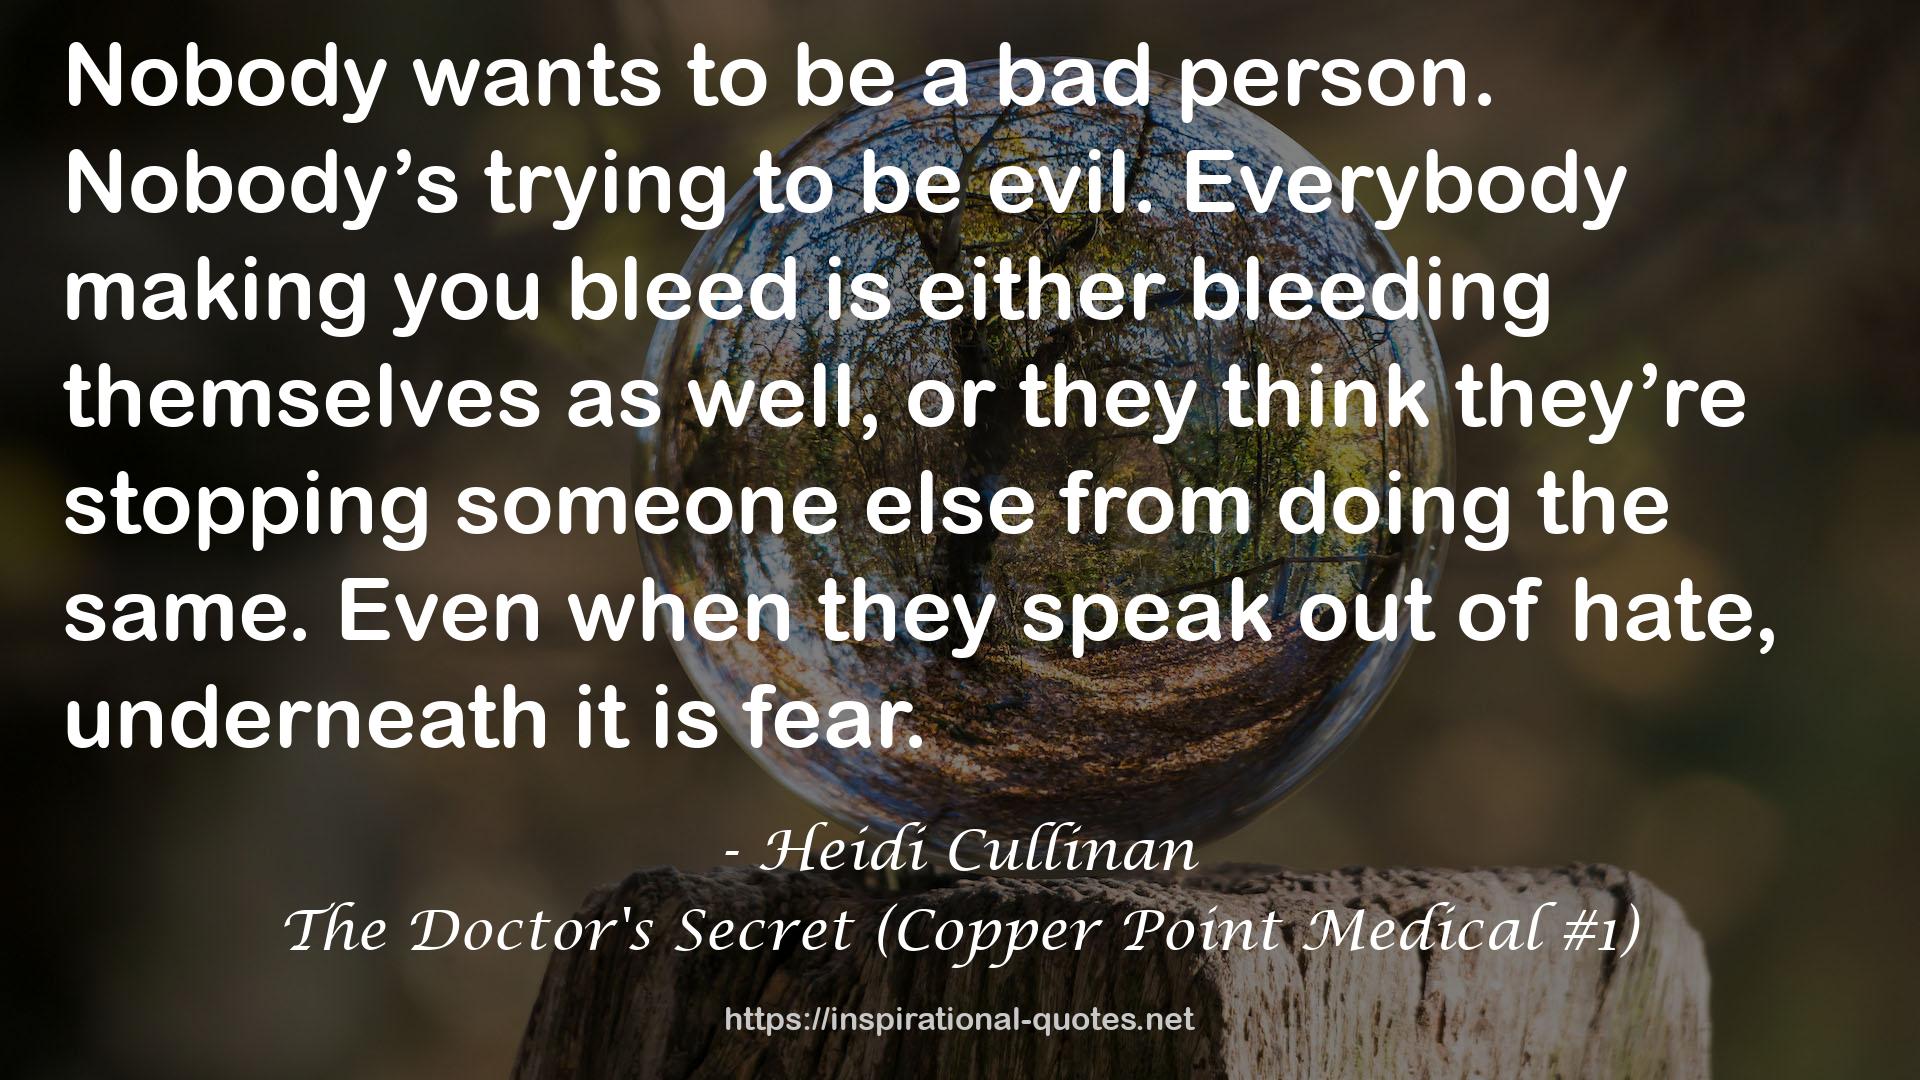 The Doctor's Secret (Copper Point Medical #1) QUOTES